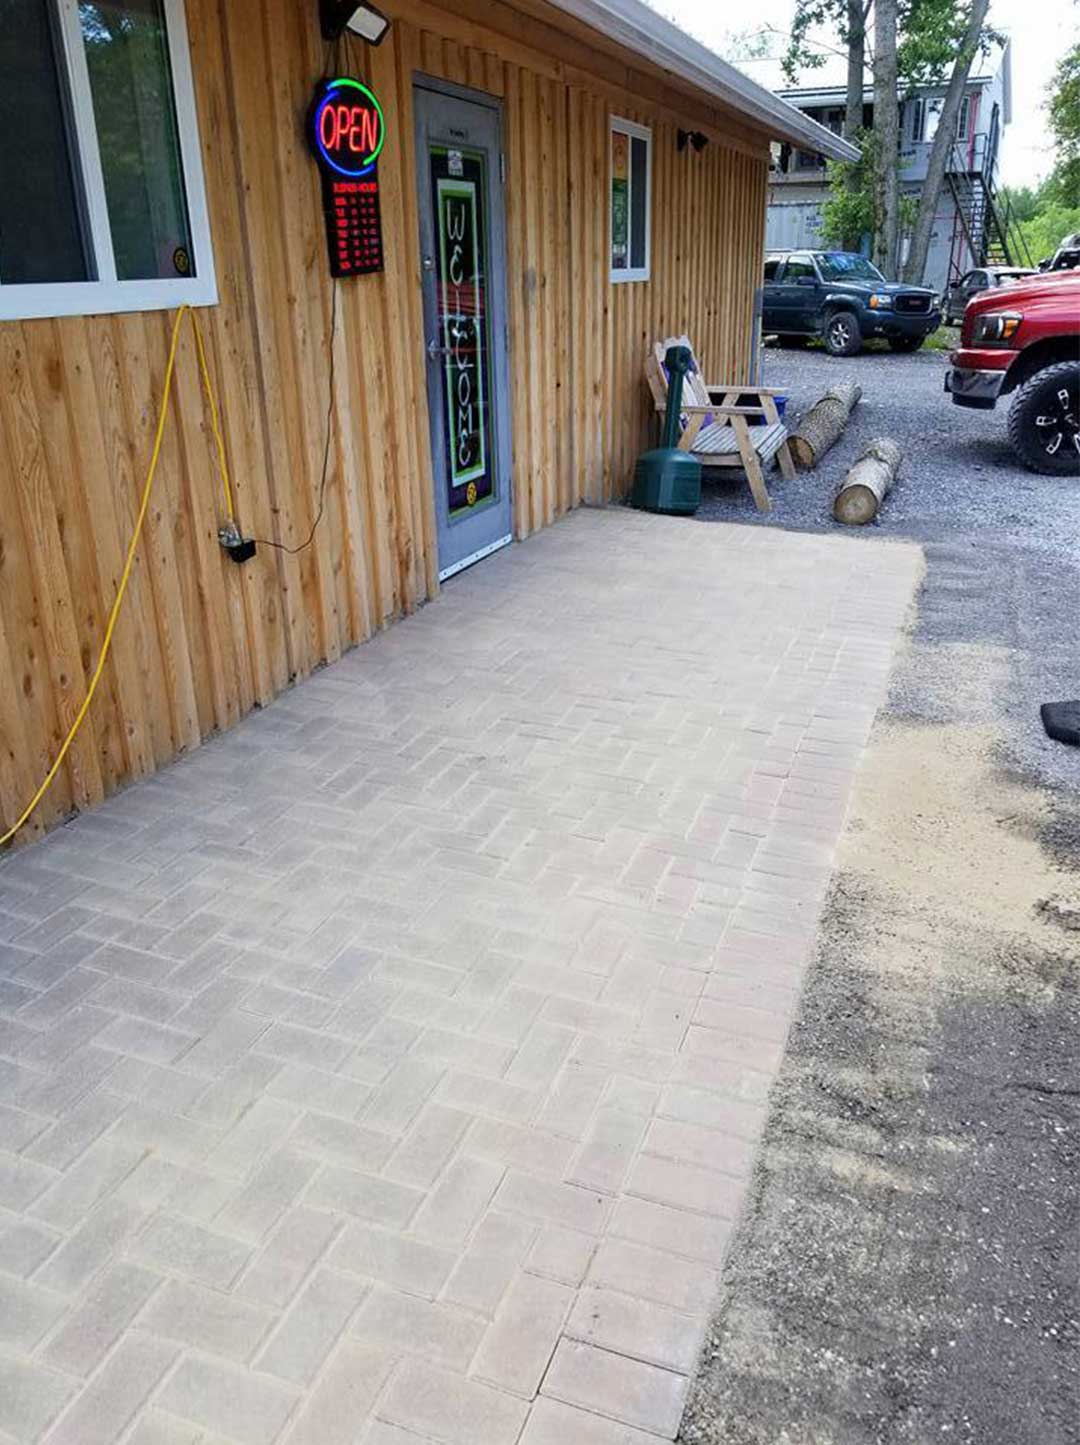 interlocking stone path leading to front door of business